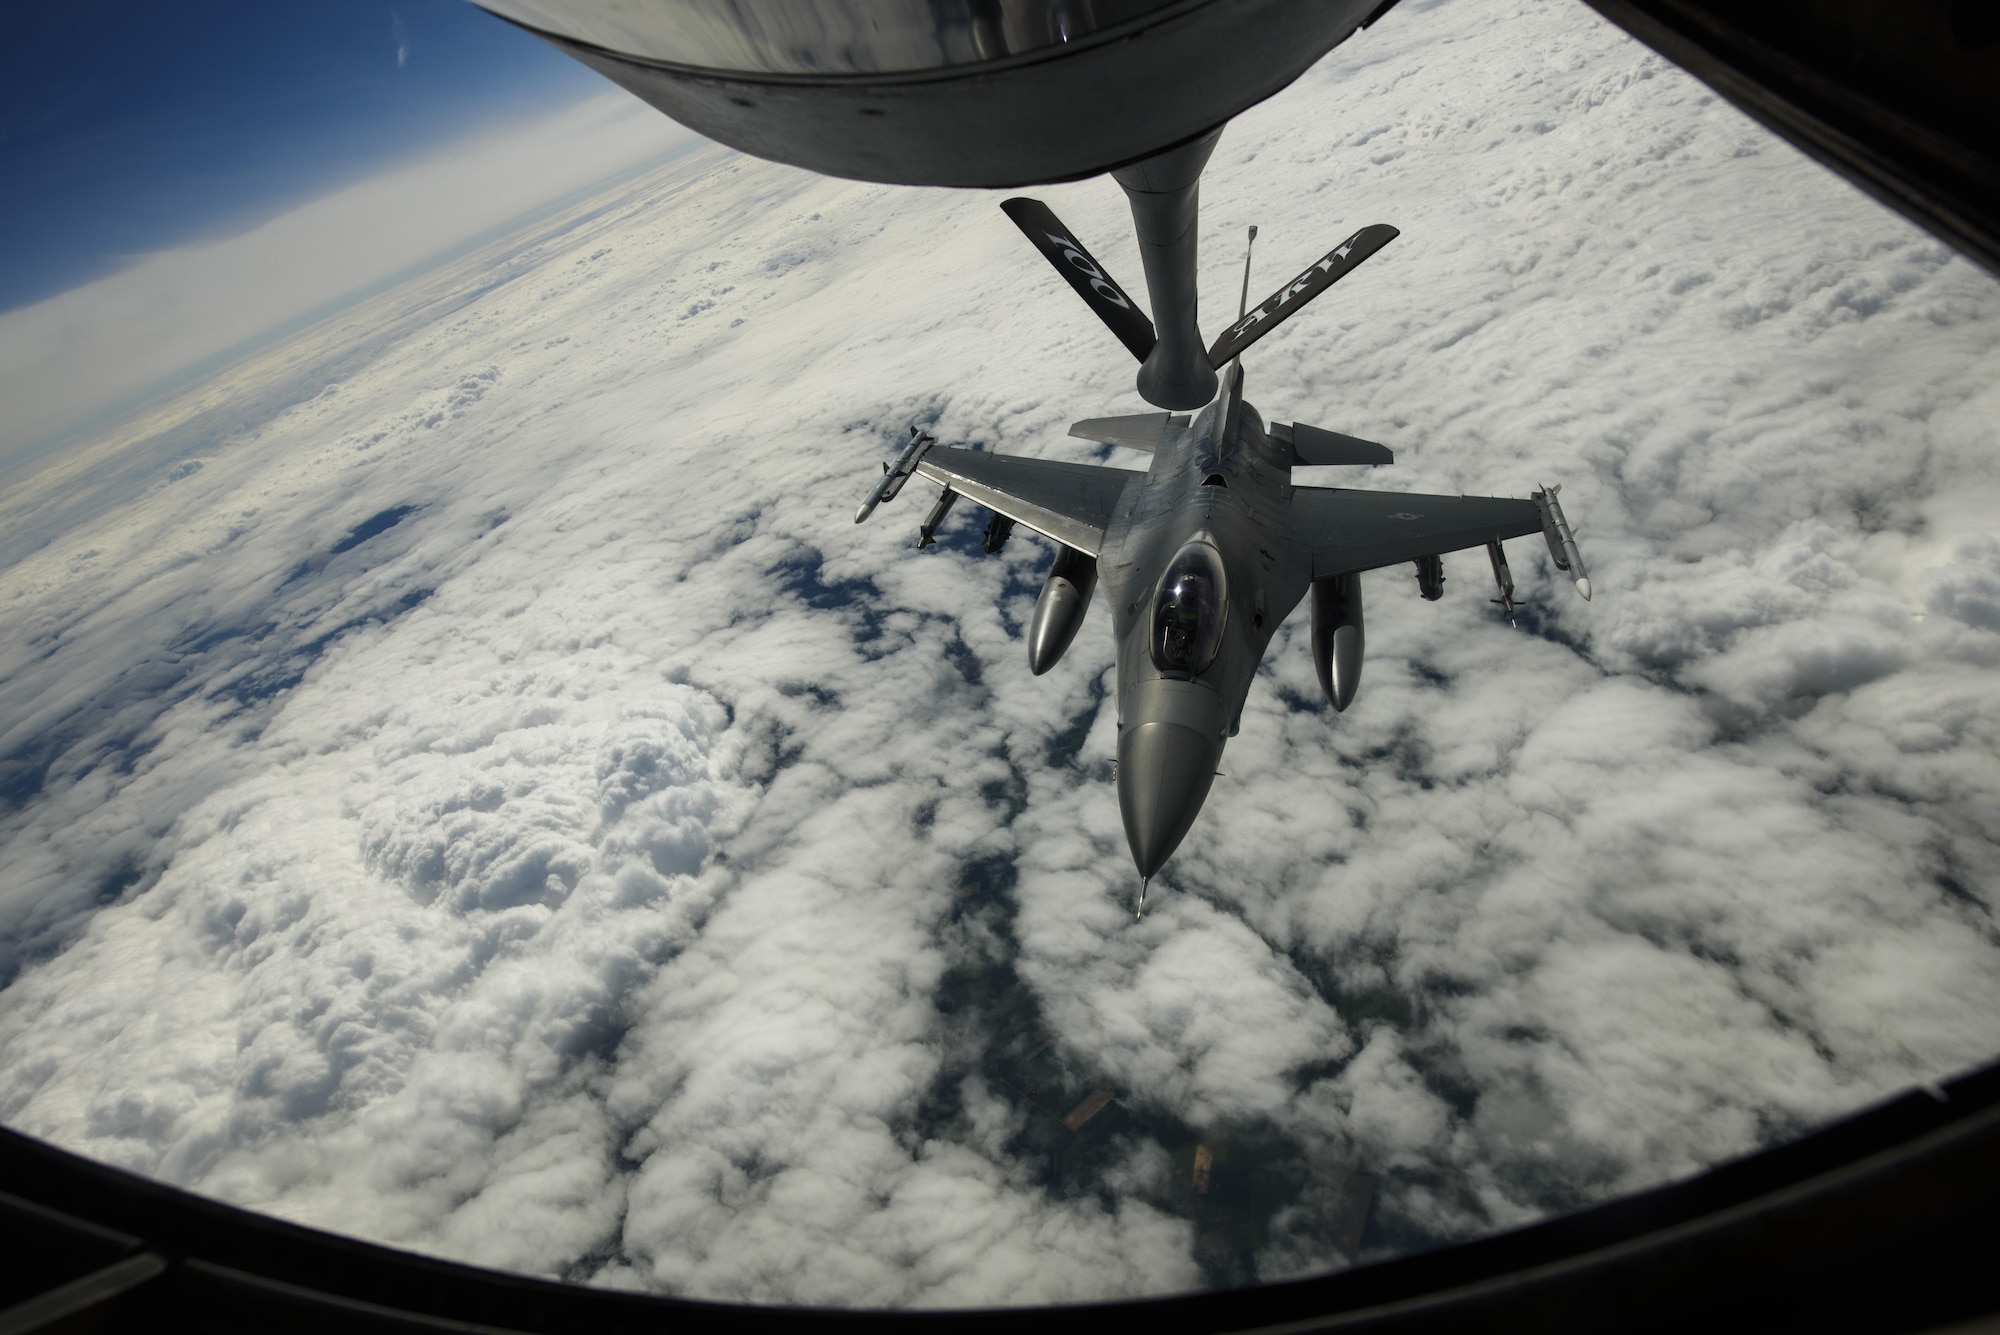 An F-16 Fighting Falcon. 510th Fighter Squadron, deployed to Krzesiny Air Base, Poland, in support of Aviation Detachment rotation 17-3, exercise BALTOPS and exercise Saber Strike approaches the boom on a KC-135R Stratotanker over the Baltic Sea, June 13, 2017. BALTOPS is an annually recurring multinational exercise designed to enhance flexibility and interoperability, as well as demonstrate resolve of allied and partner forces to defend the Baltic region. Participating nations include Belgium, Denmark, Estonia, Finland, France, Germany, Latvia, Lithuania, the Netherlands, Norway, Poland, Sweden, the United Kingdom, and the United States. (U.S. Air Force photo by Staff Sgt. Jonathan Snyder)